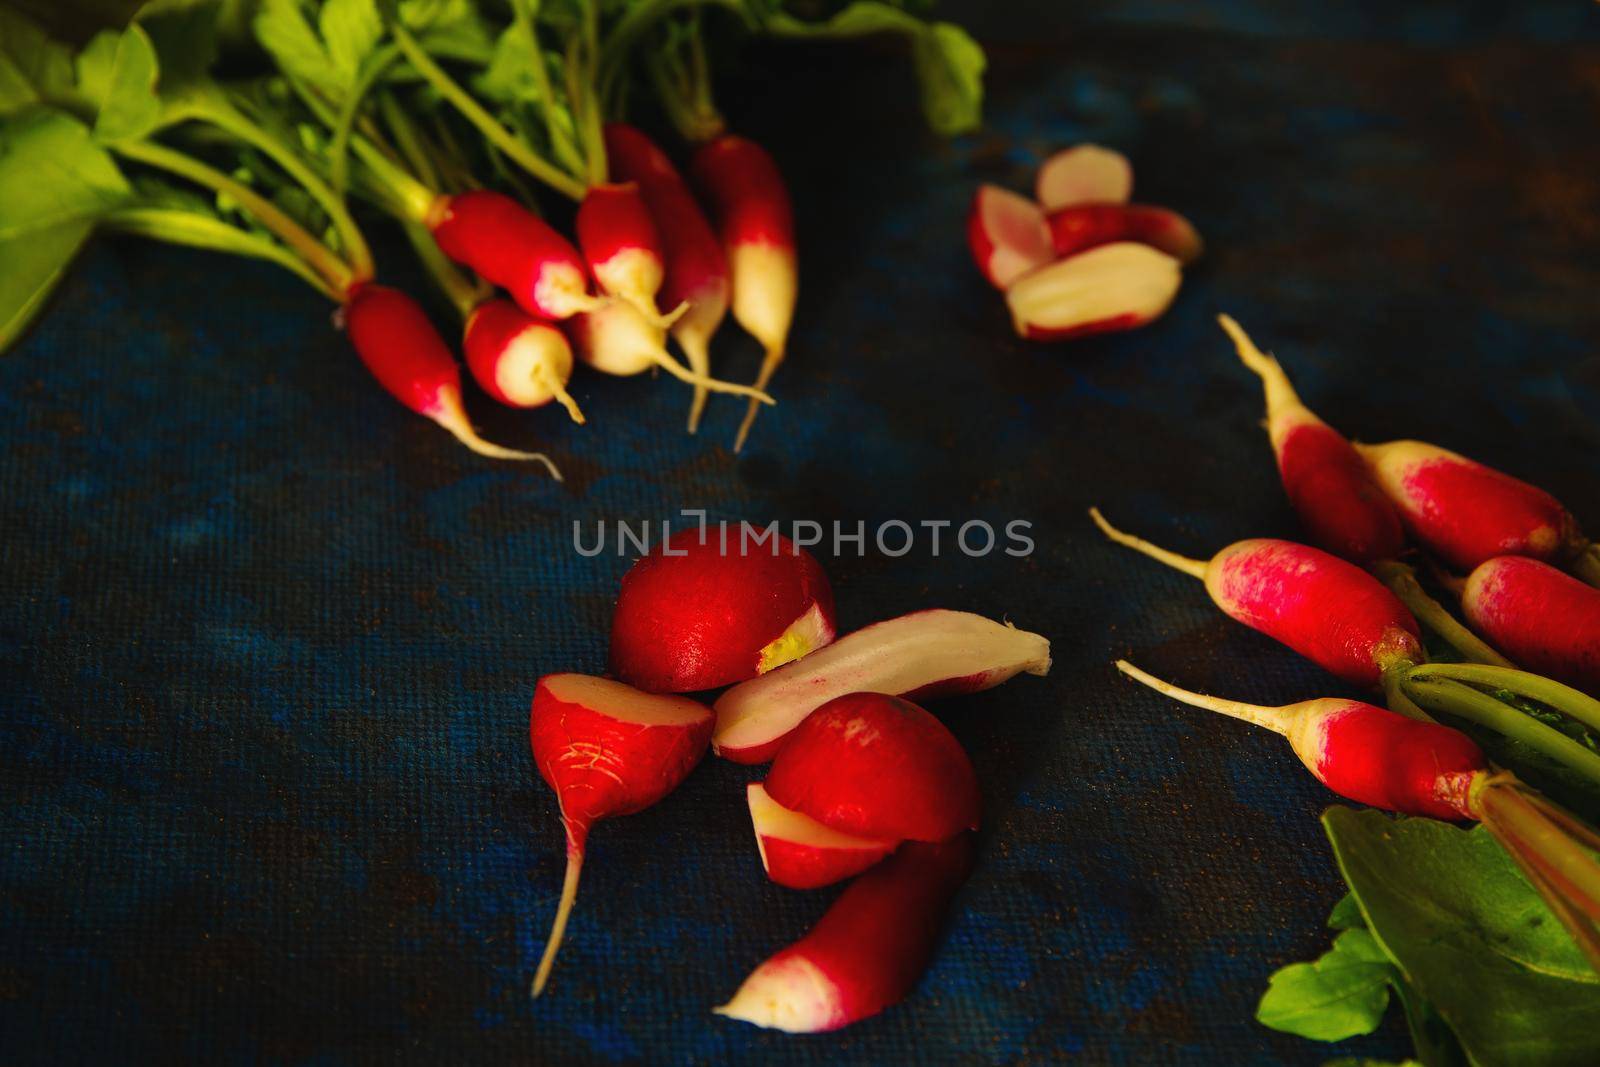 radish on a blue background laid out in groups